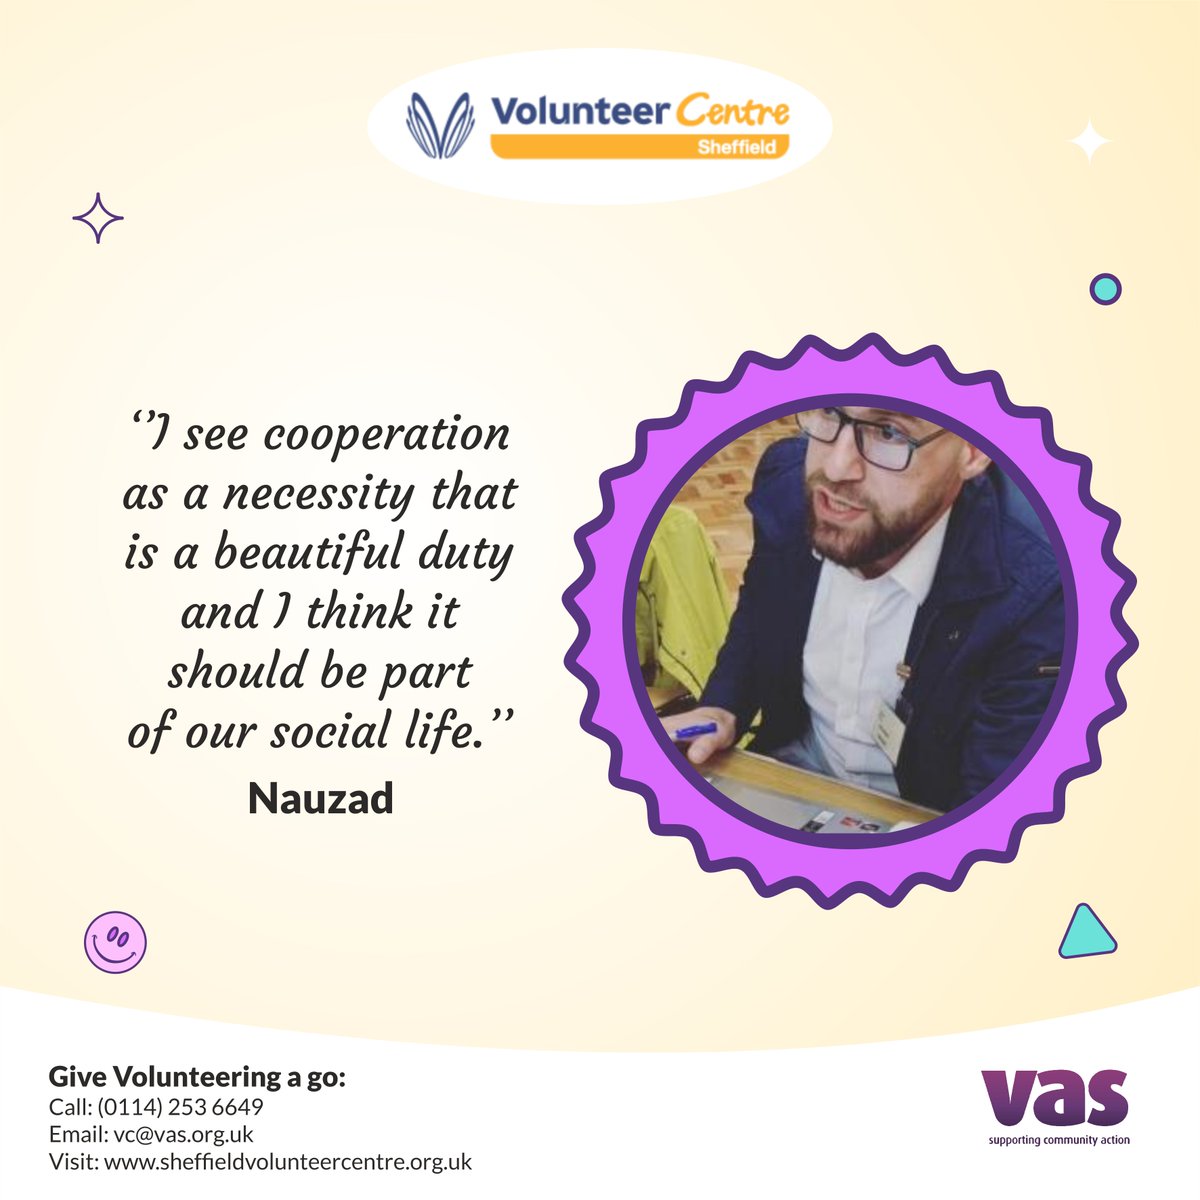 Nauzad tells us about his experience volunteering with @savte2 here: bit.ly/3uXqWch Want to give volunteering a go? Check out 200+ opportunities in #Sheffield: sheffieldvolunteercentre.org.uk or call us on (0114) 253 6649 (Mon-Weds) 🙂 #VolunteerSheffield #GiveBack